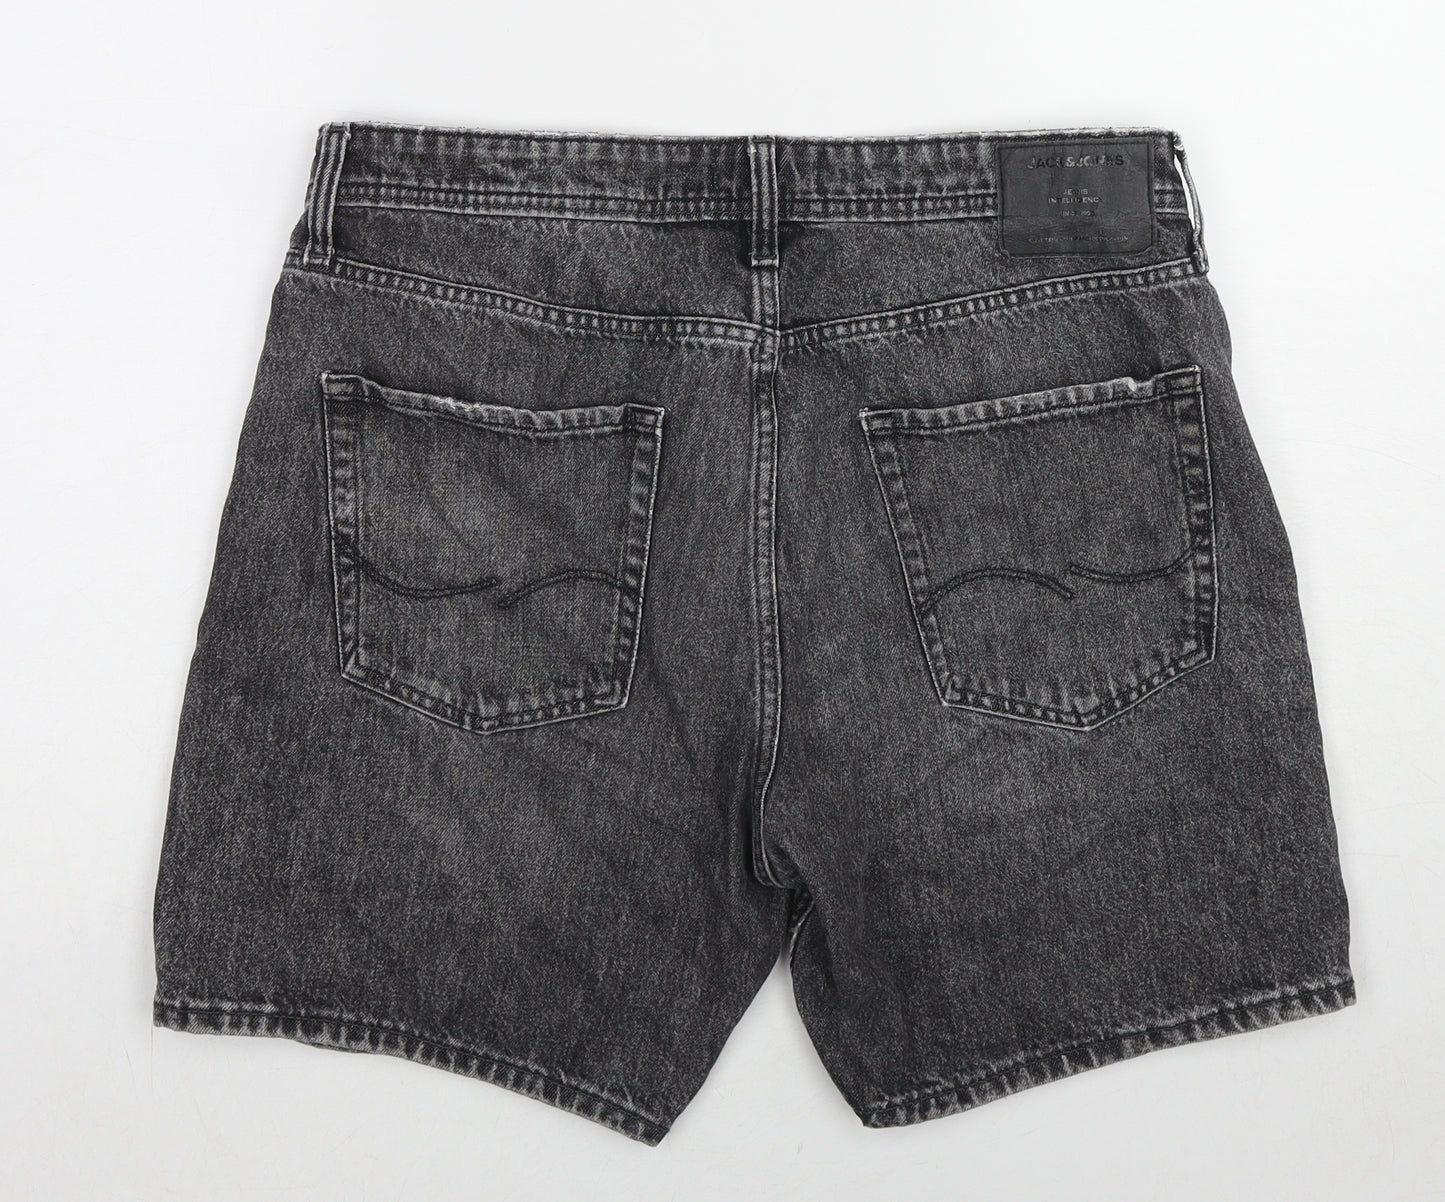 JACK & JONES Mens Black Cotton Chino Shorts Size L L7 in Relaxed Zip